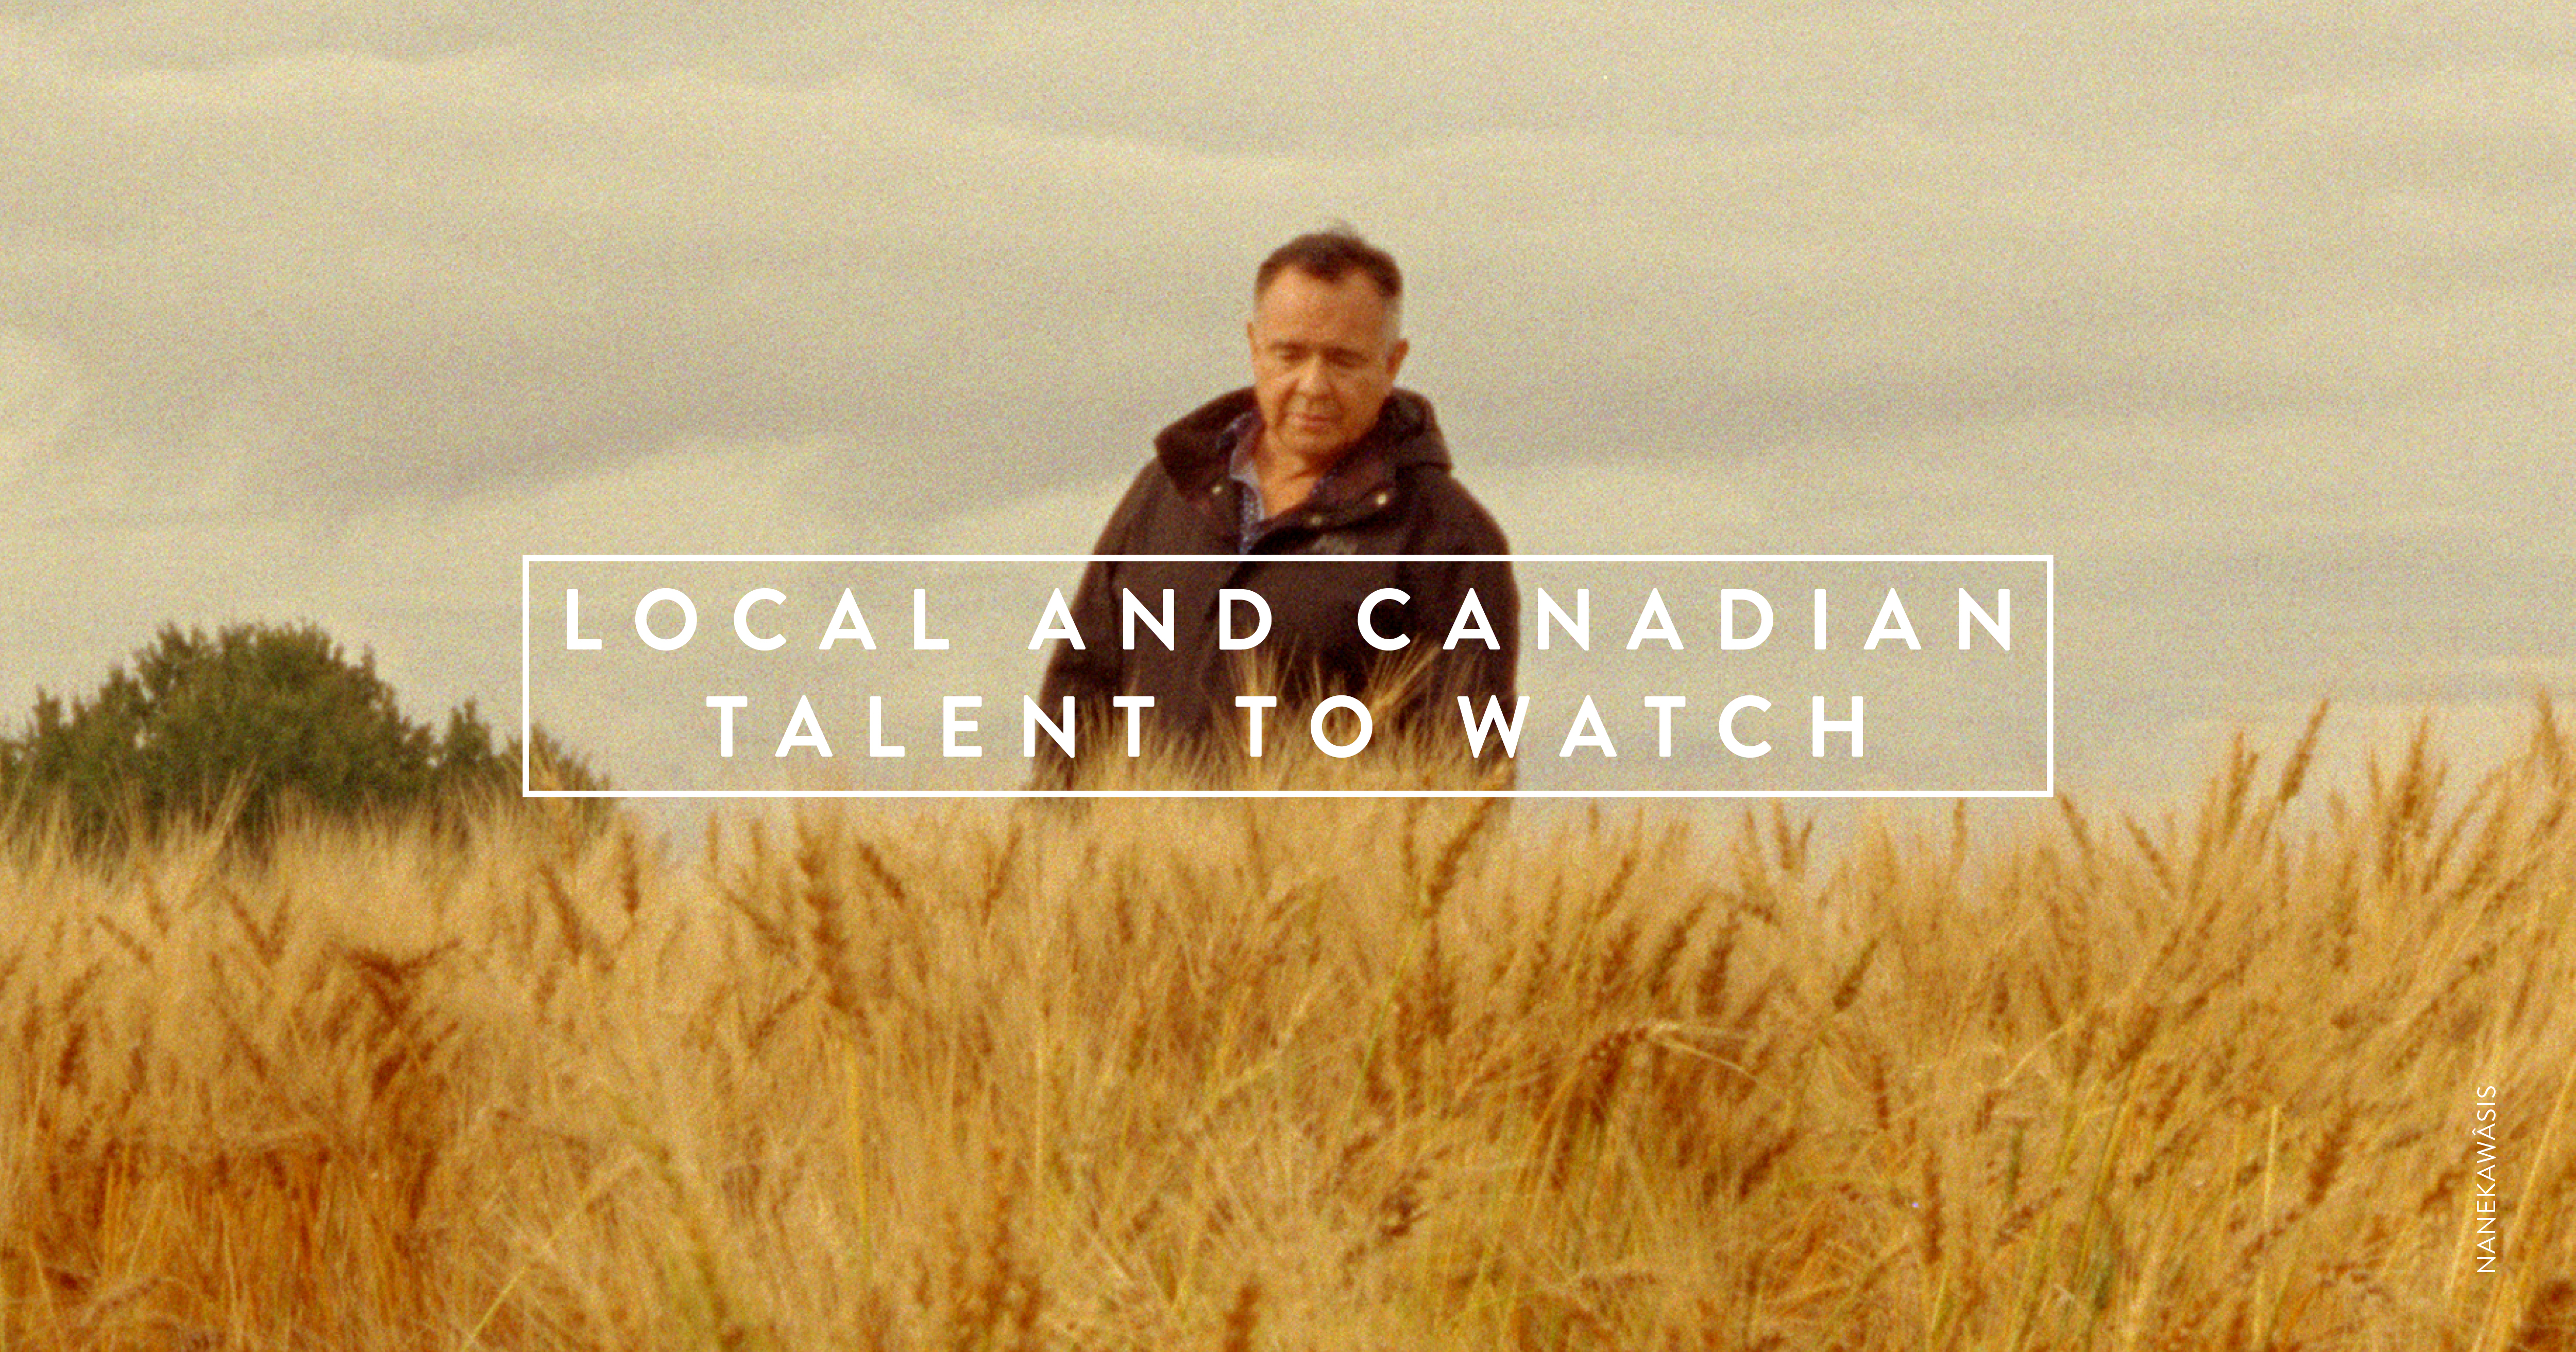 A still of an Indigenous person walking through tall wheat and grass with a big open sky behind them. White text over the image reads: LOCAL AND CANADIAN TALENT TO WATCH